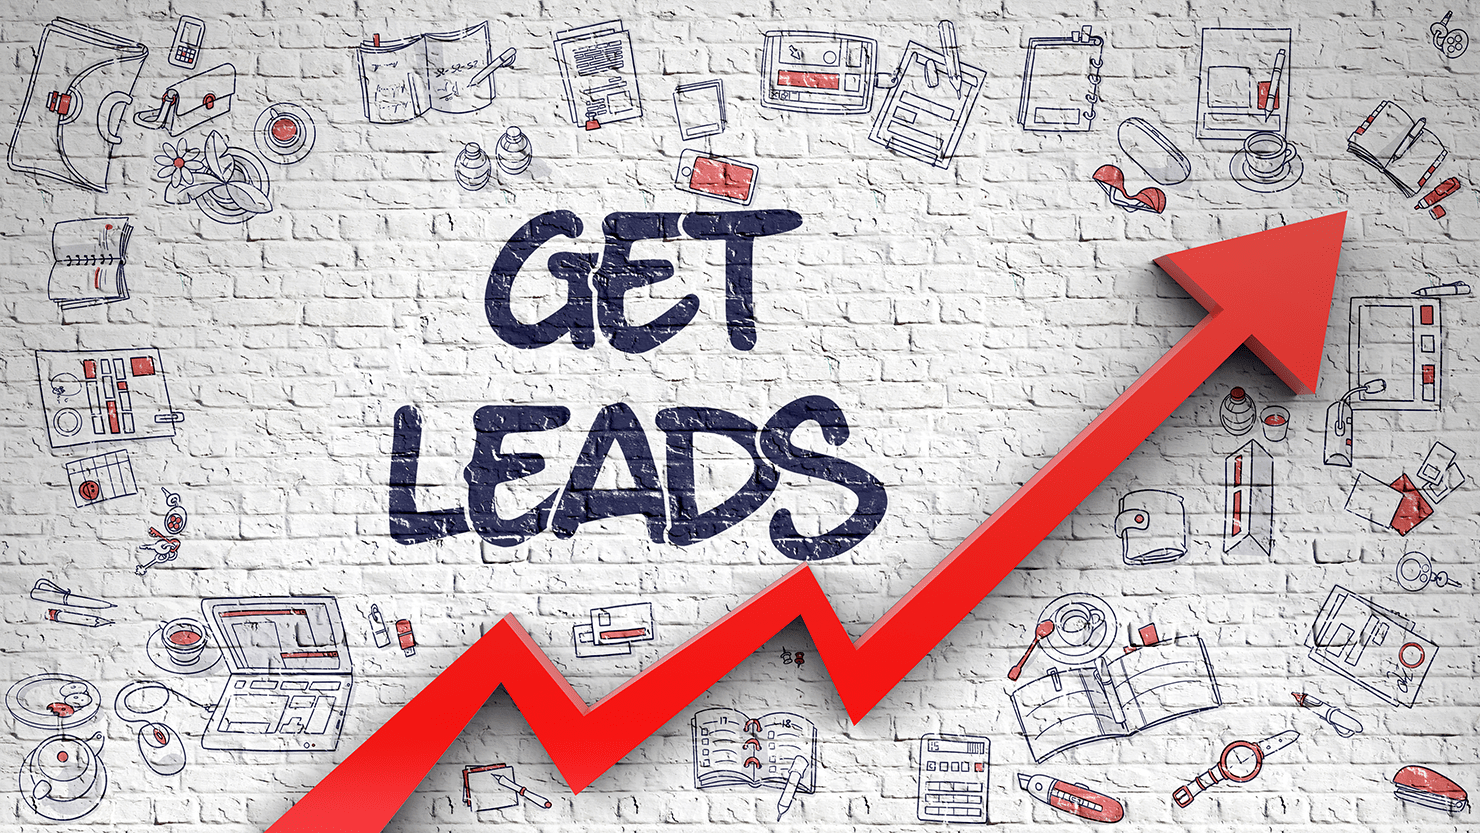 How To Generate Leads For Your Business